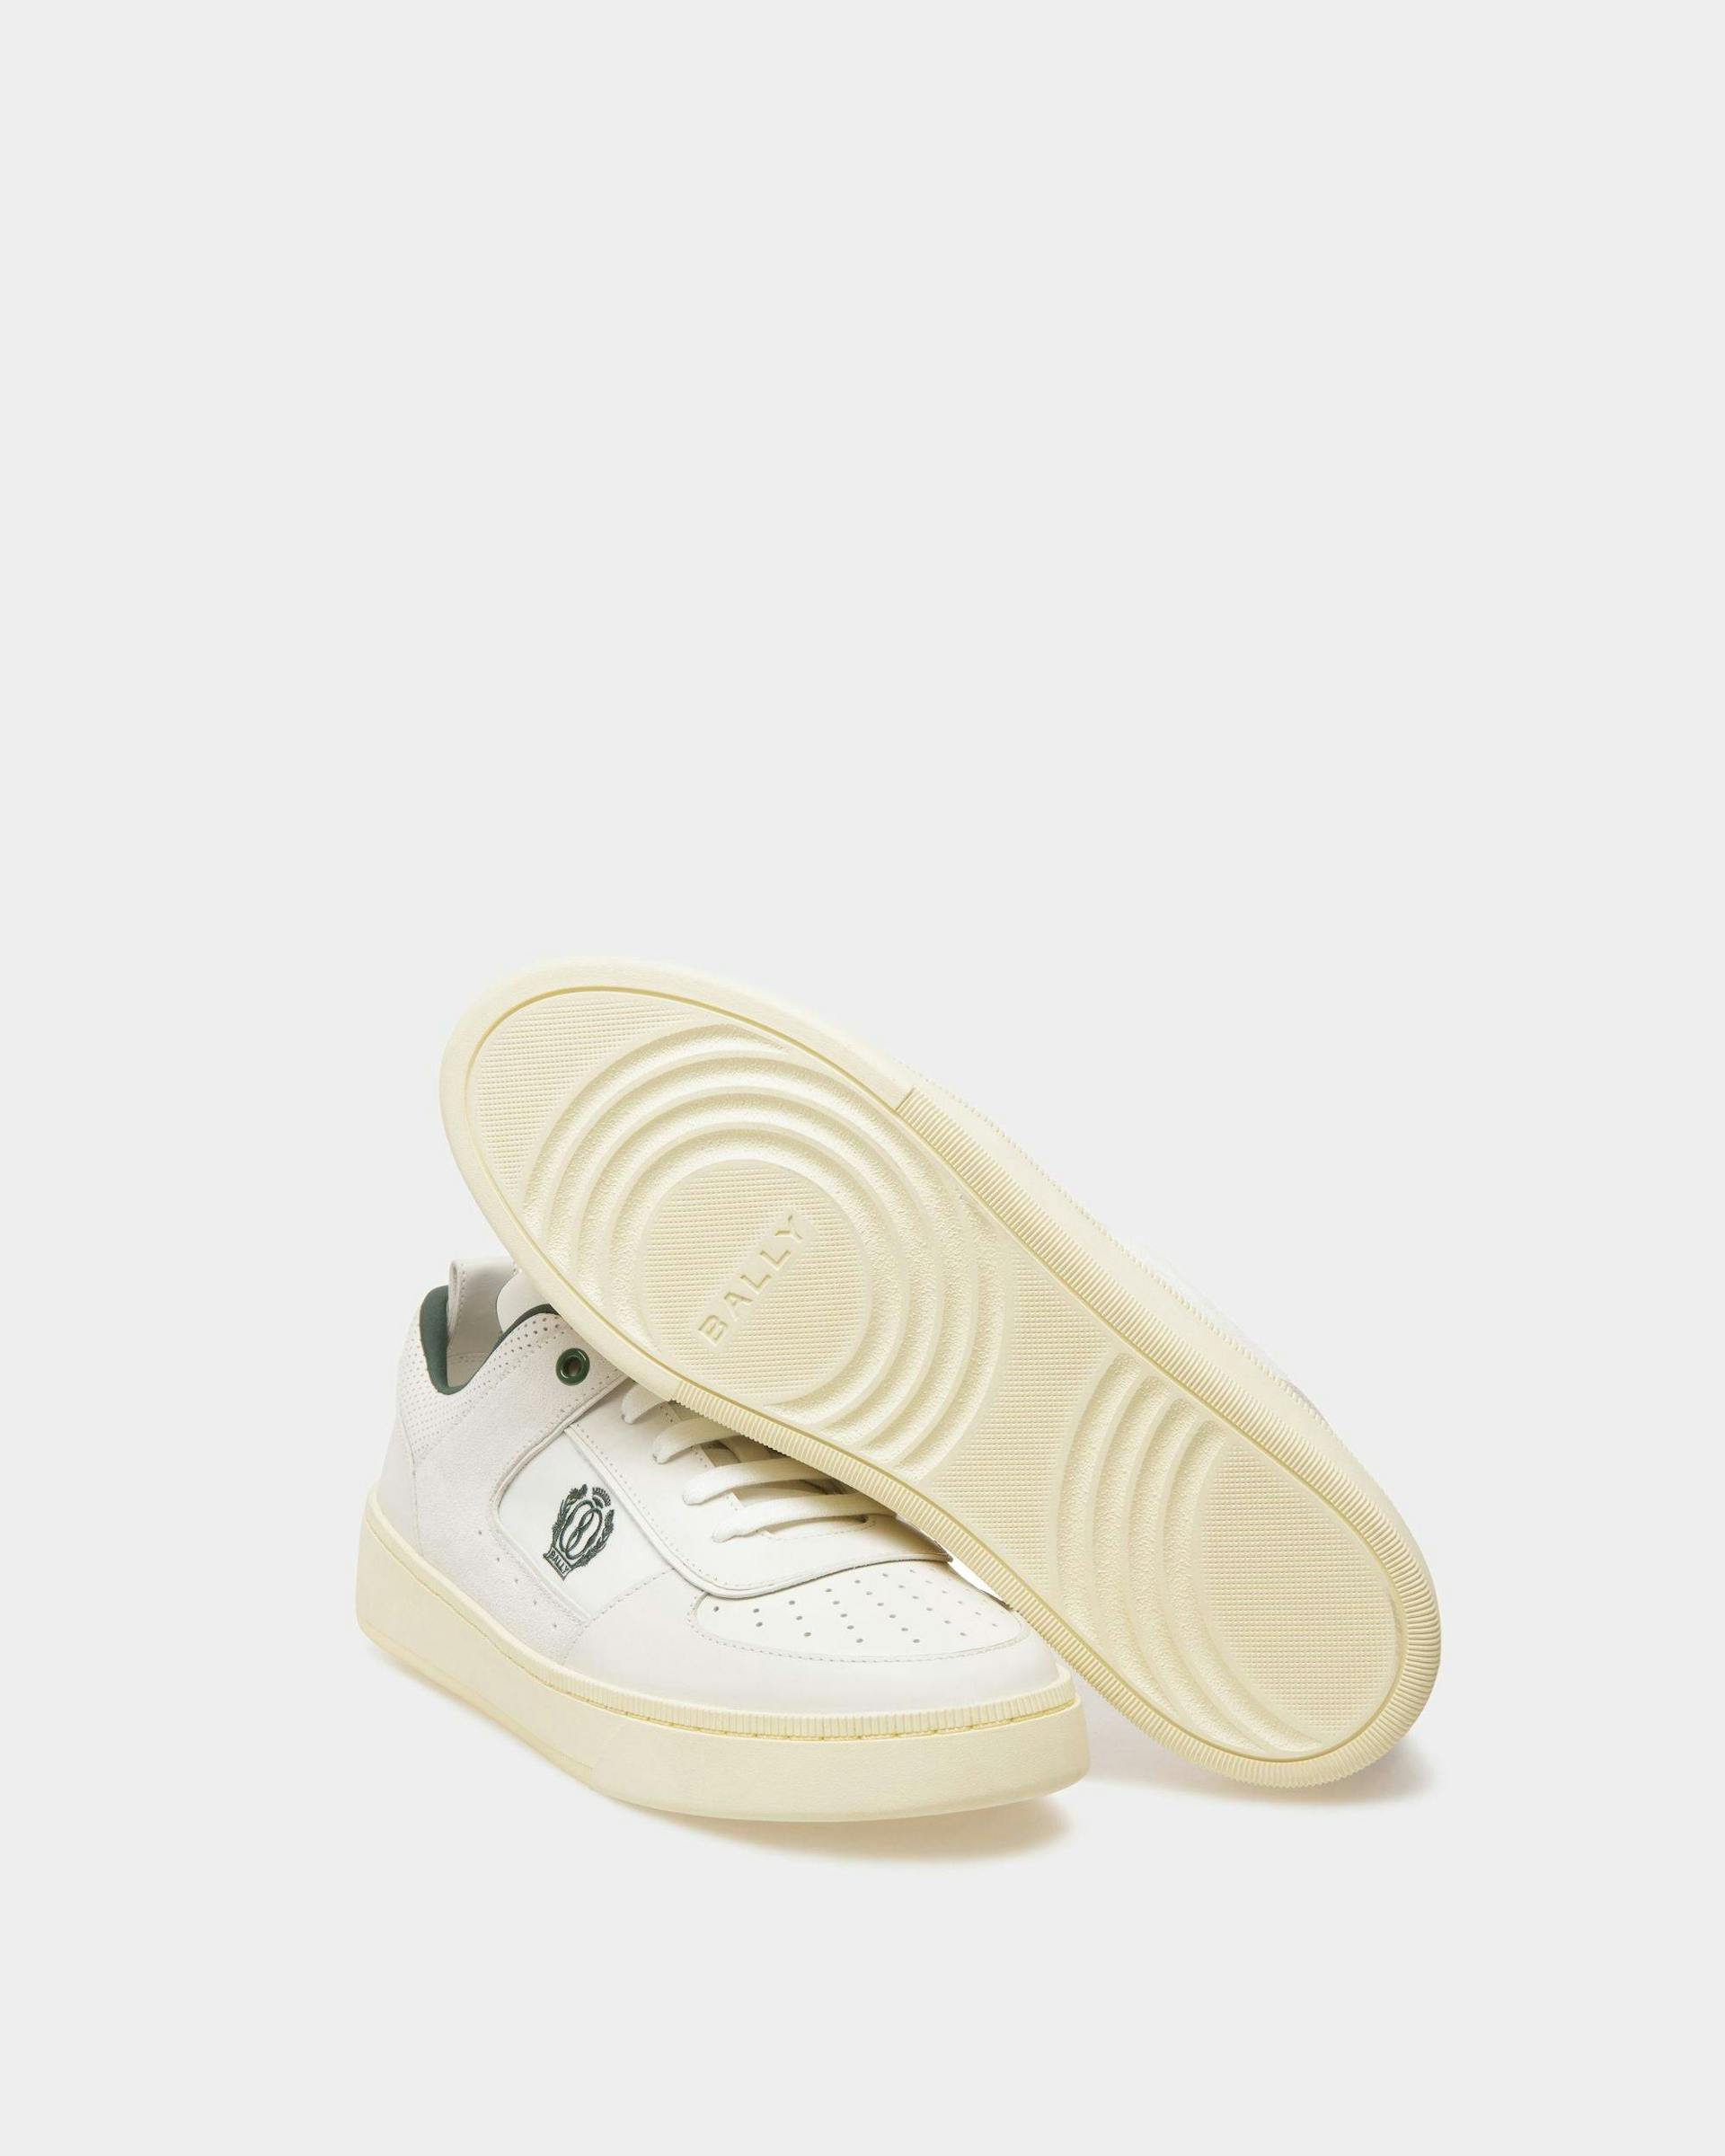 Raise Sneakers In White Leather - Men's - Bally - 04